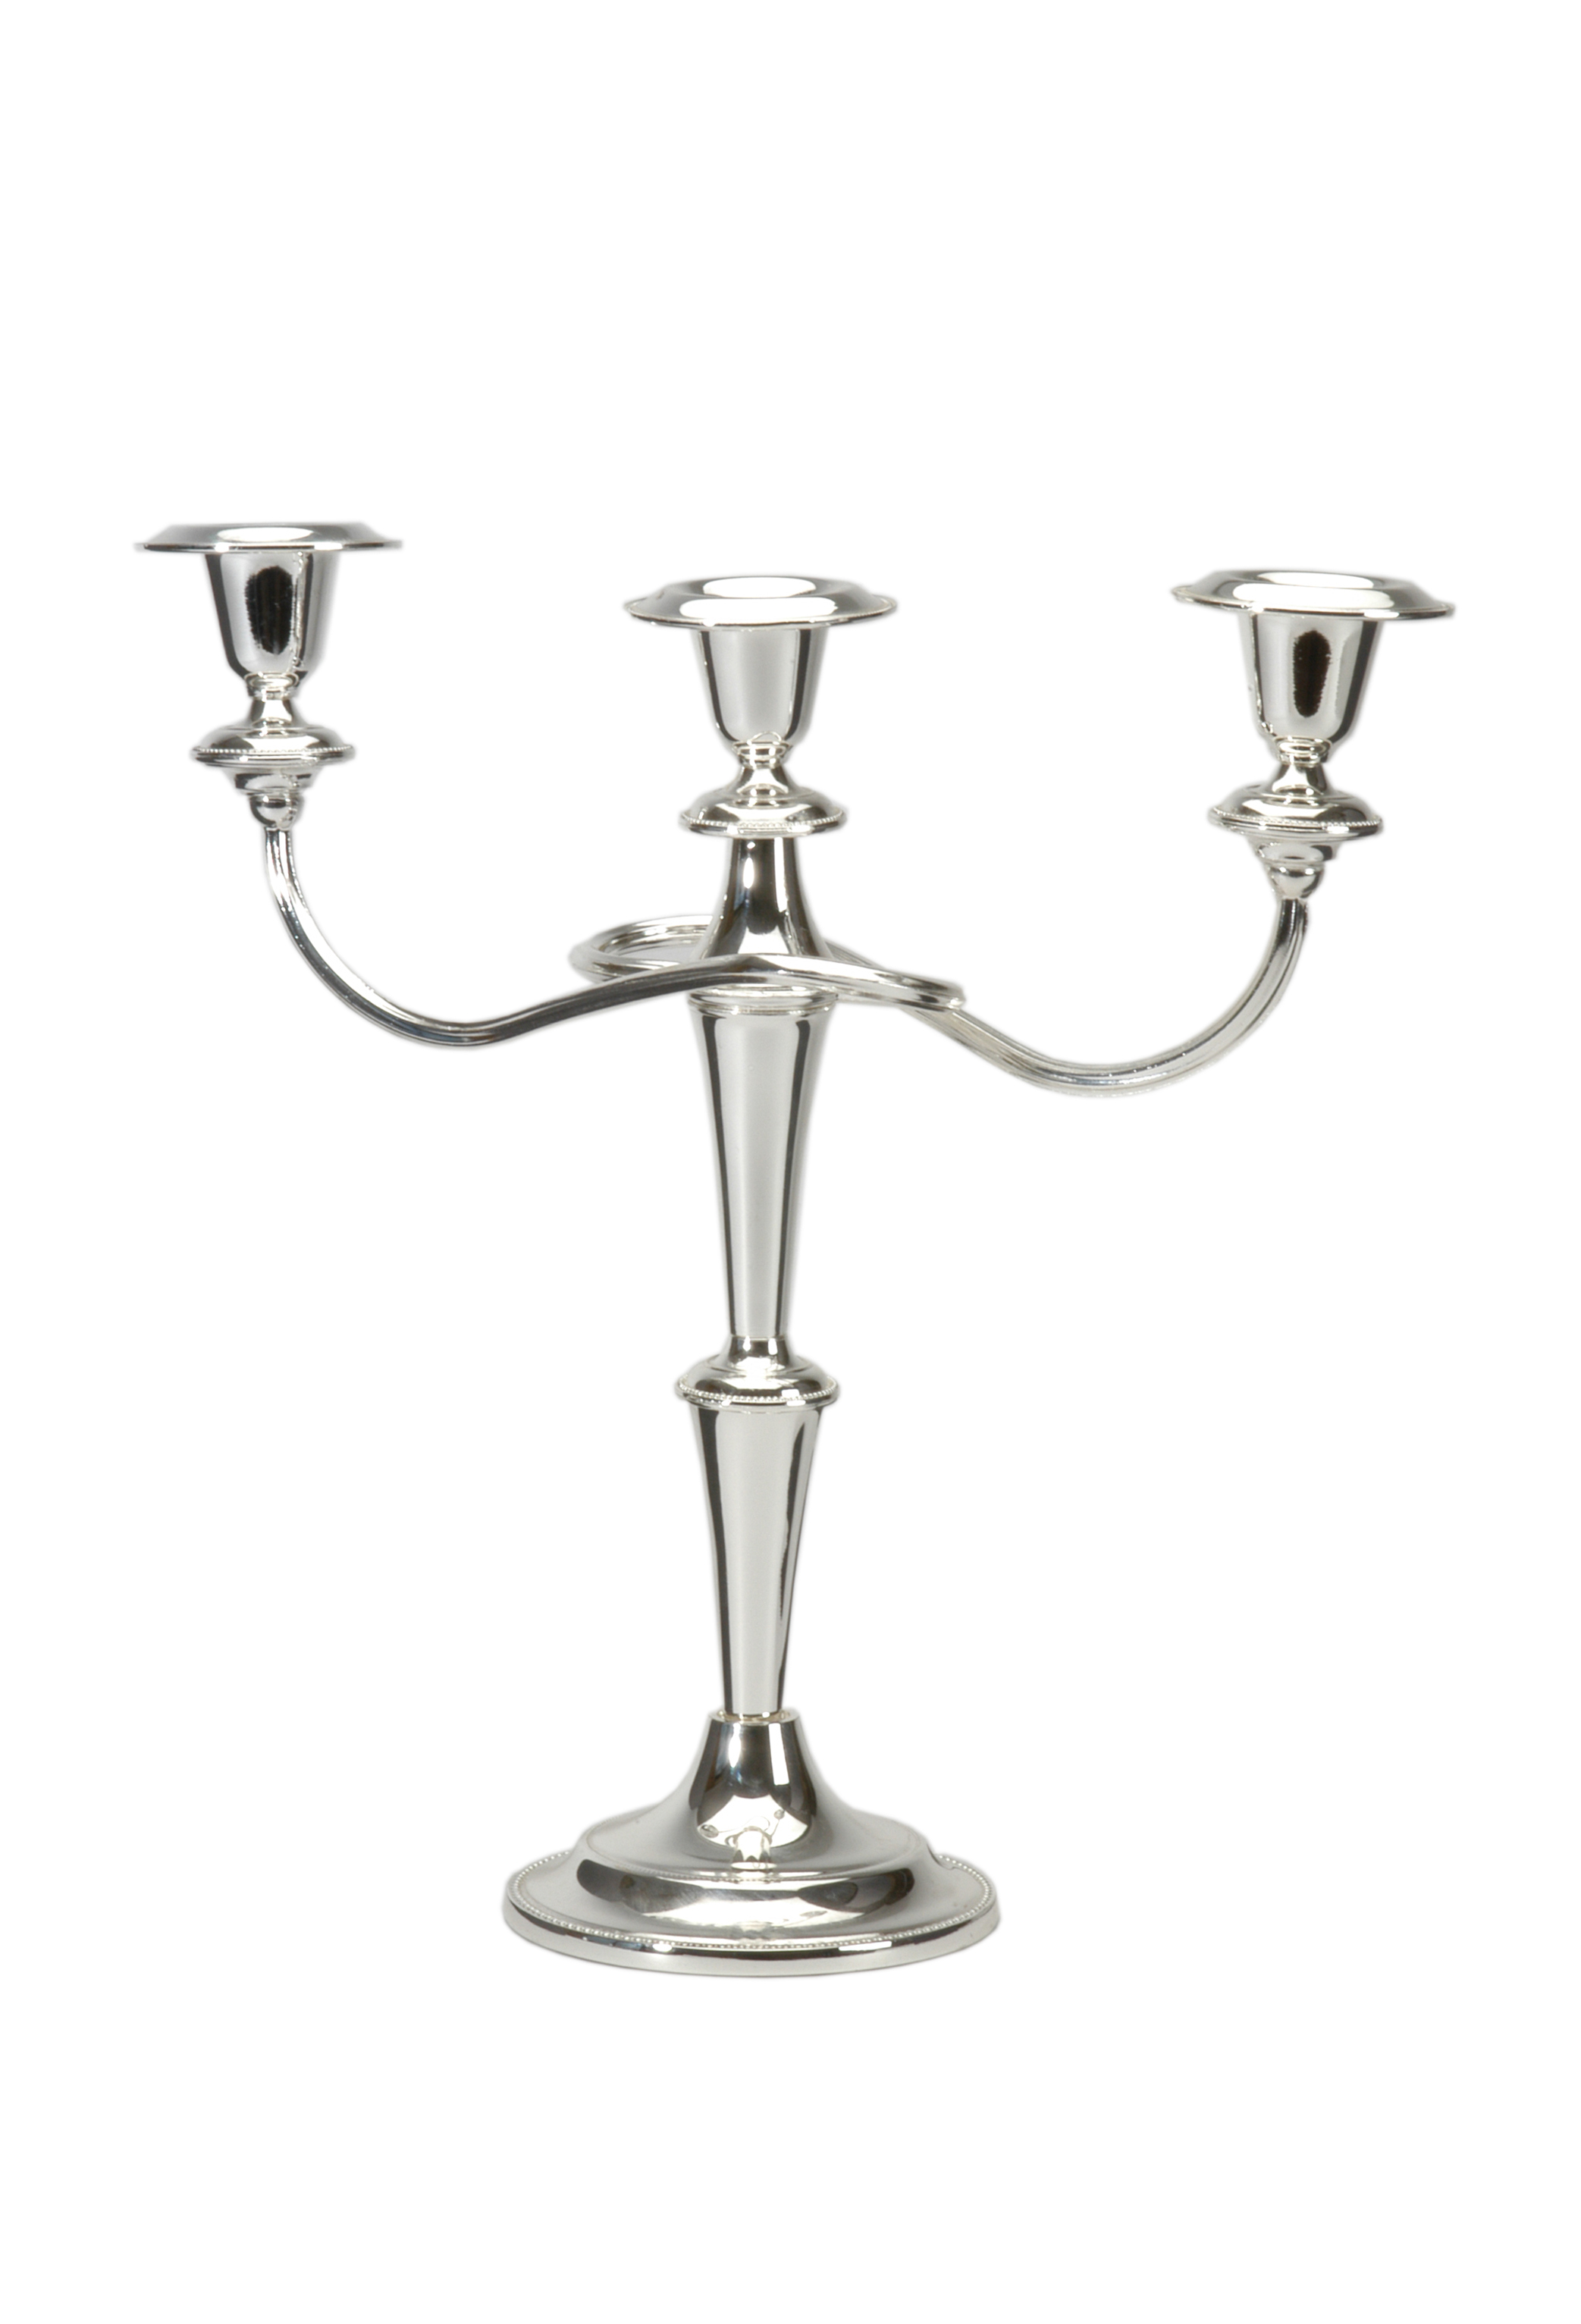 category_T1006 - Candleabra 3 light - Silver 11